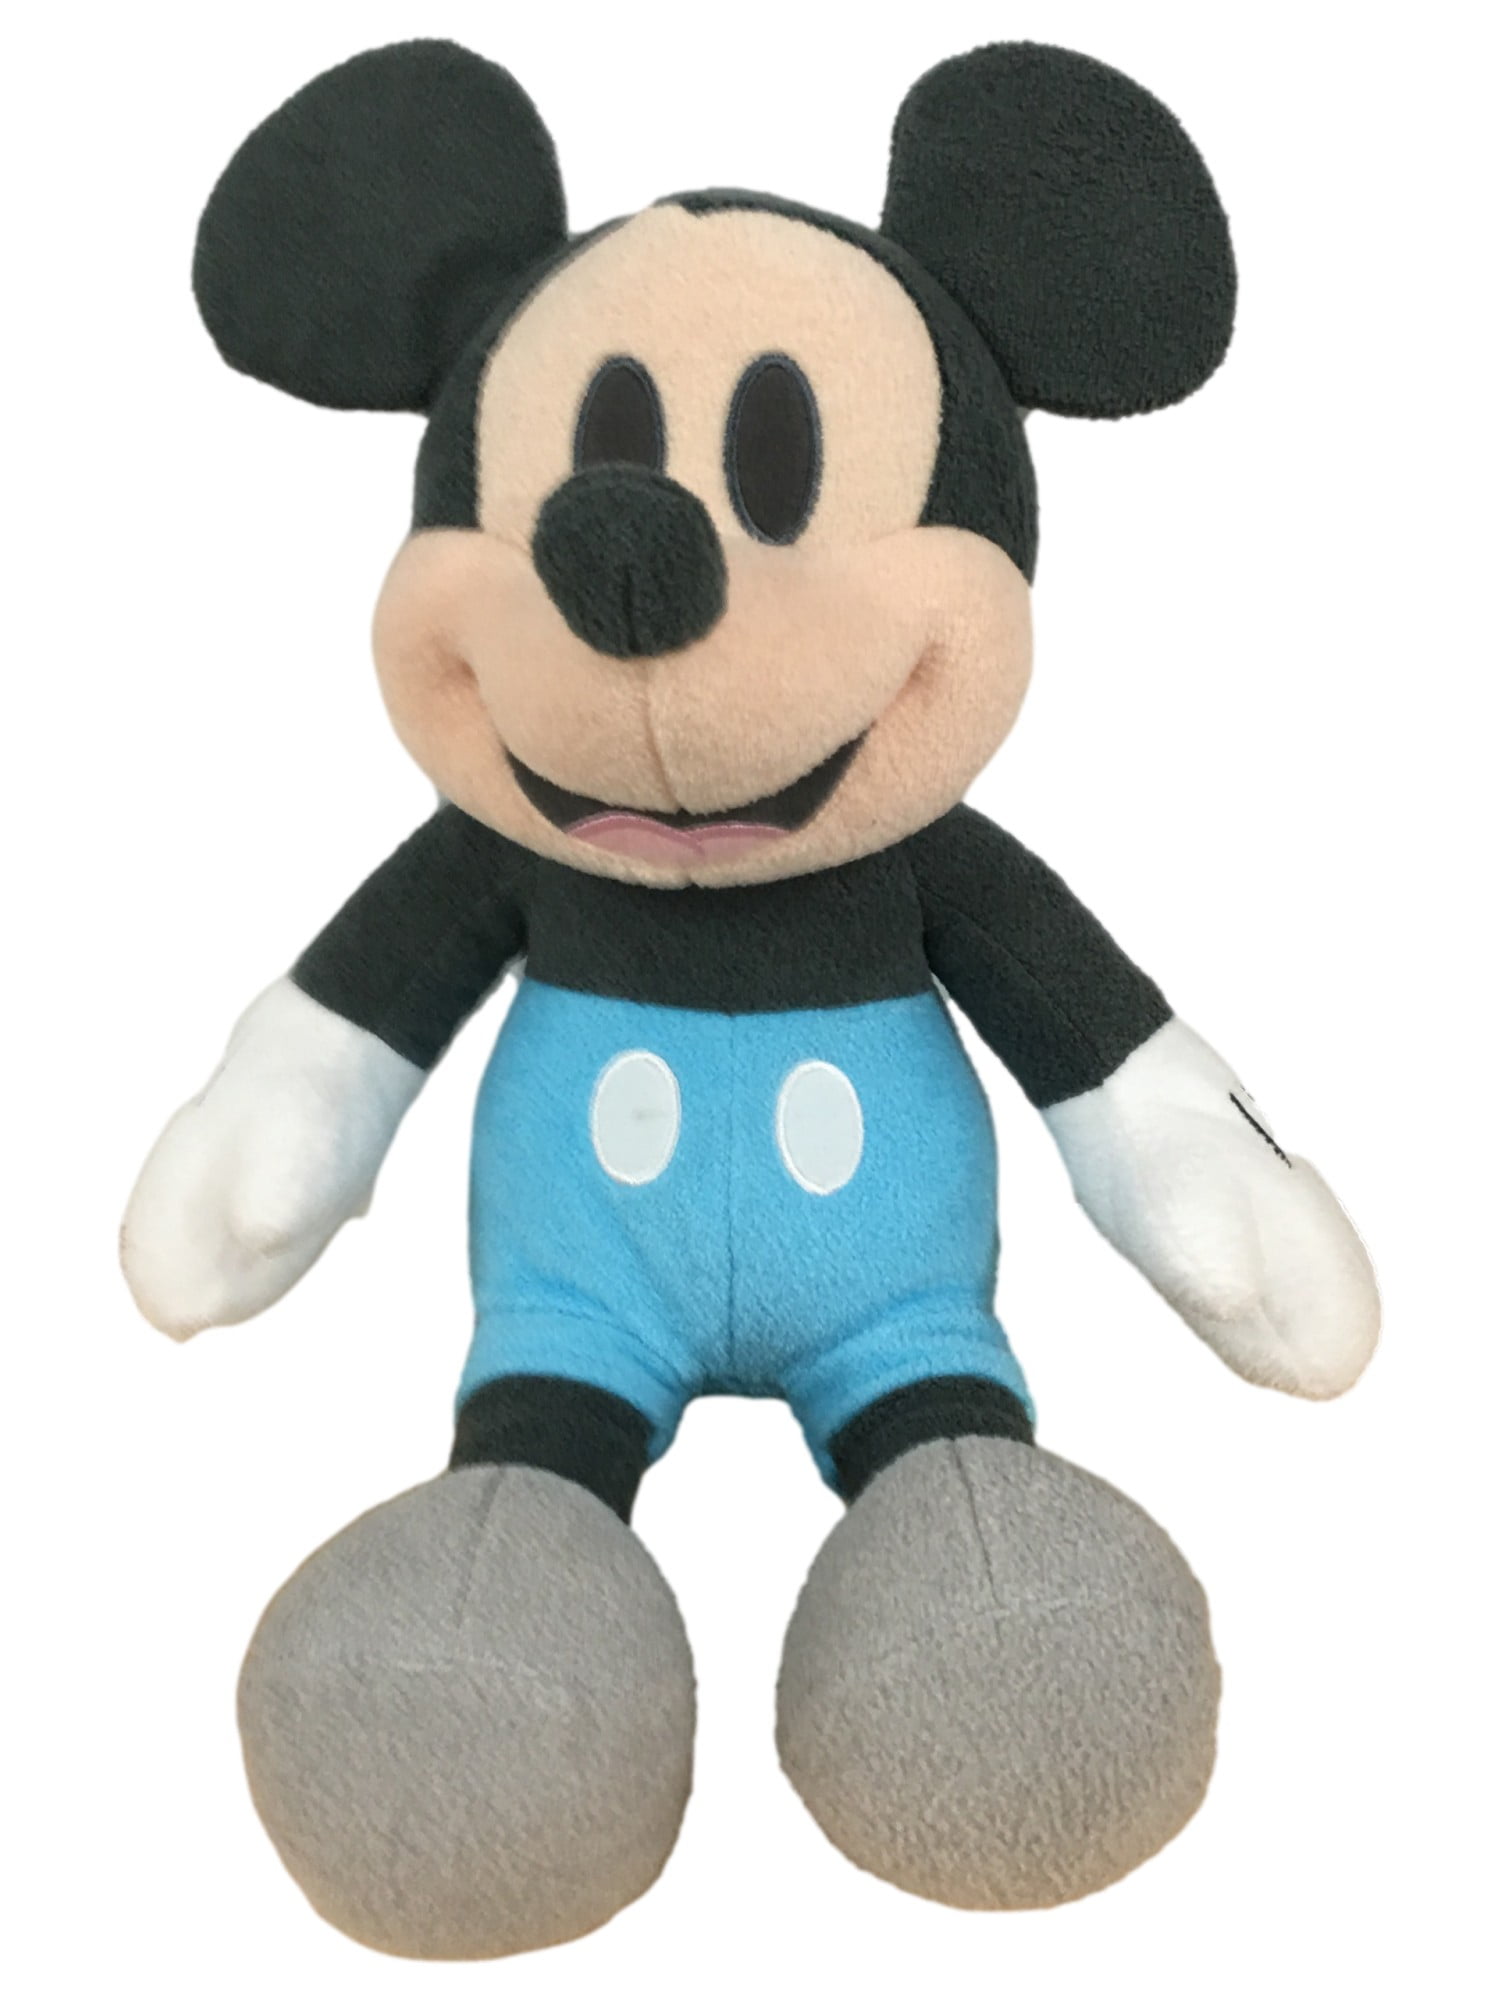 Disney Mickey Mouse Stuffed Plush Toy Kids Schoolbag Backpack H11.5" Blue 